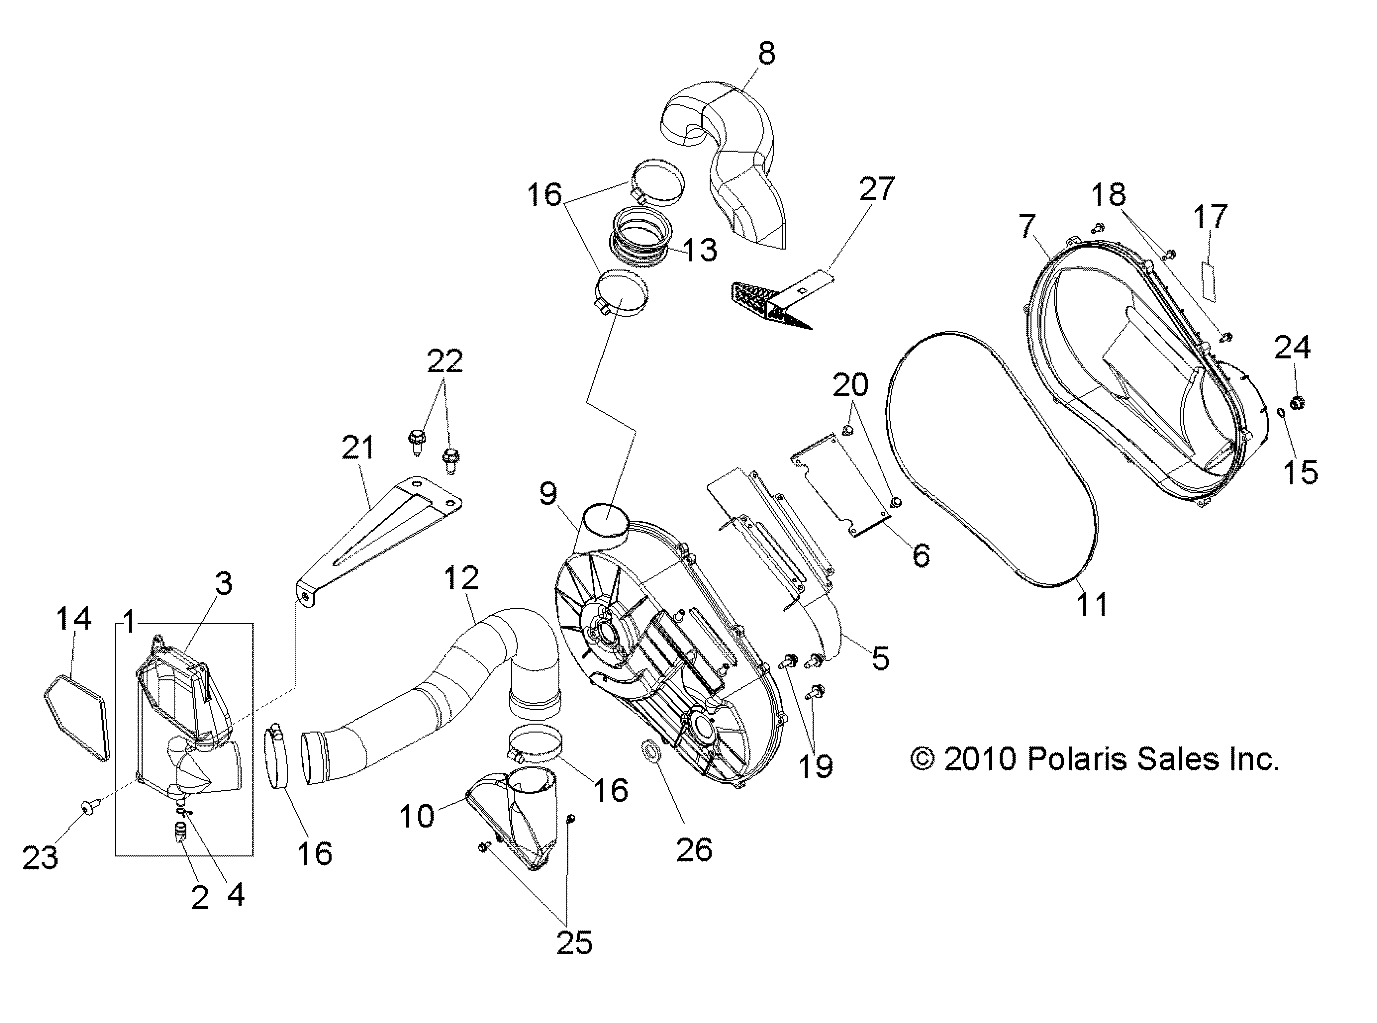 Part Number : 5438951 CLUTCH AIR DUCT  INLET